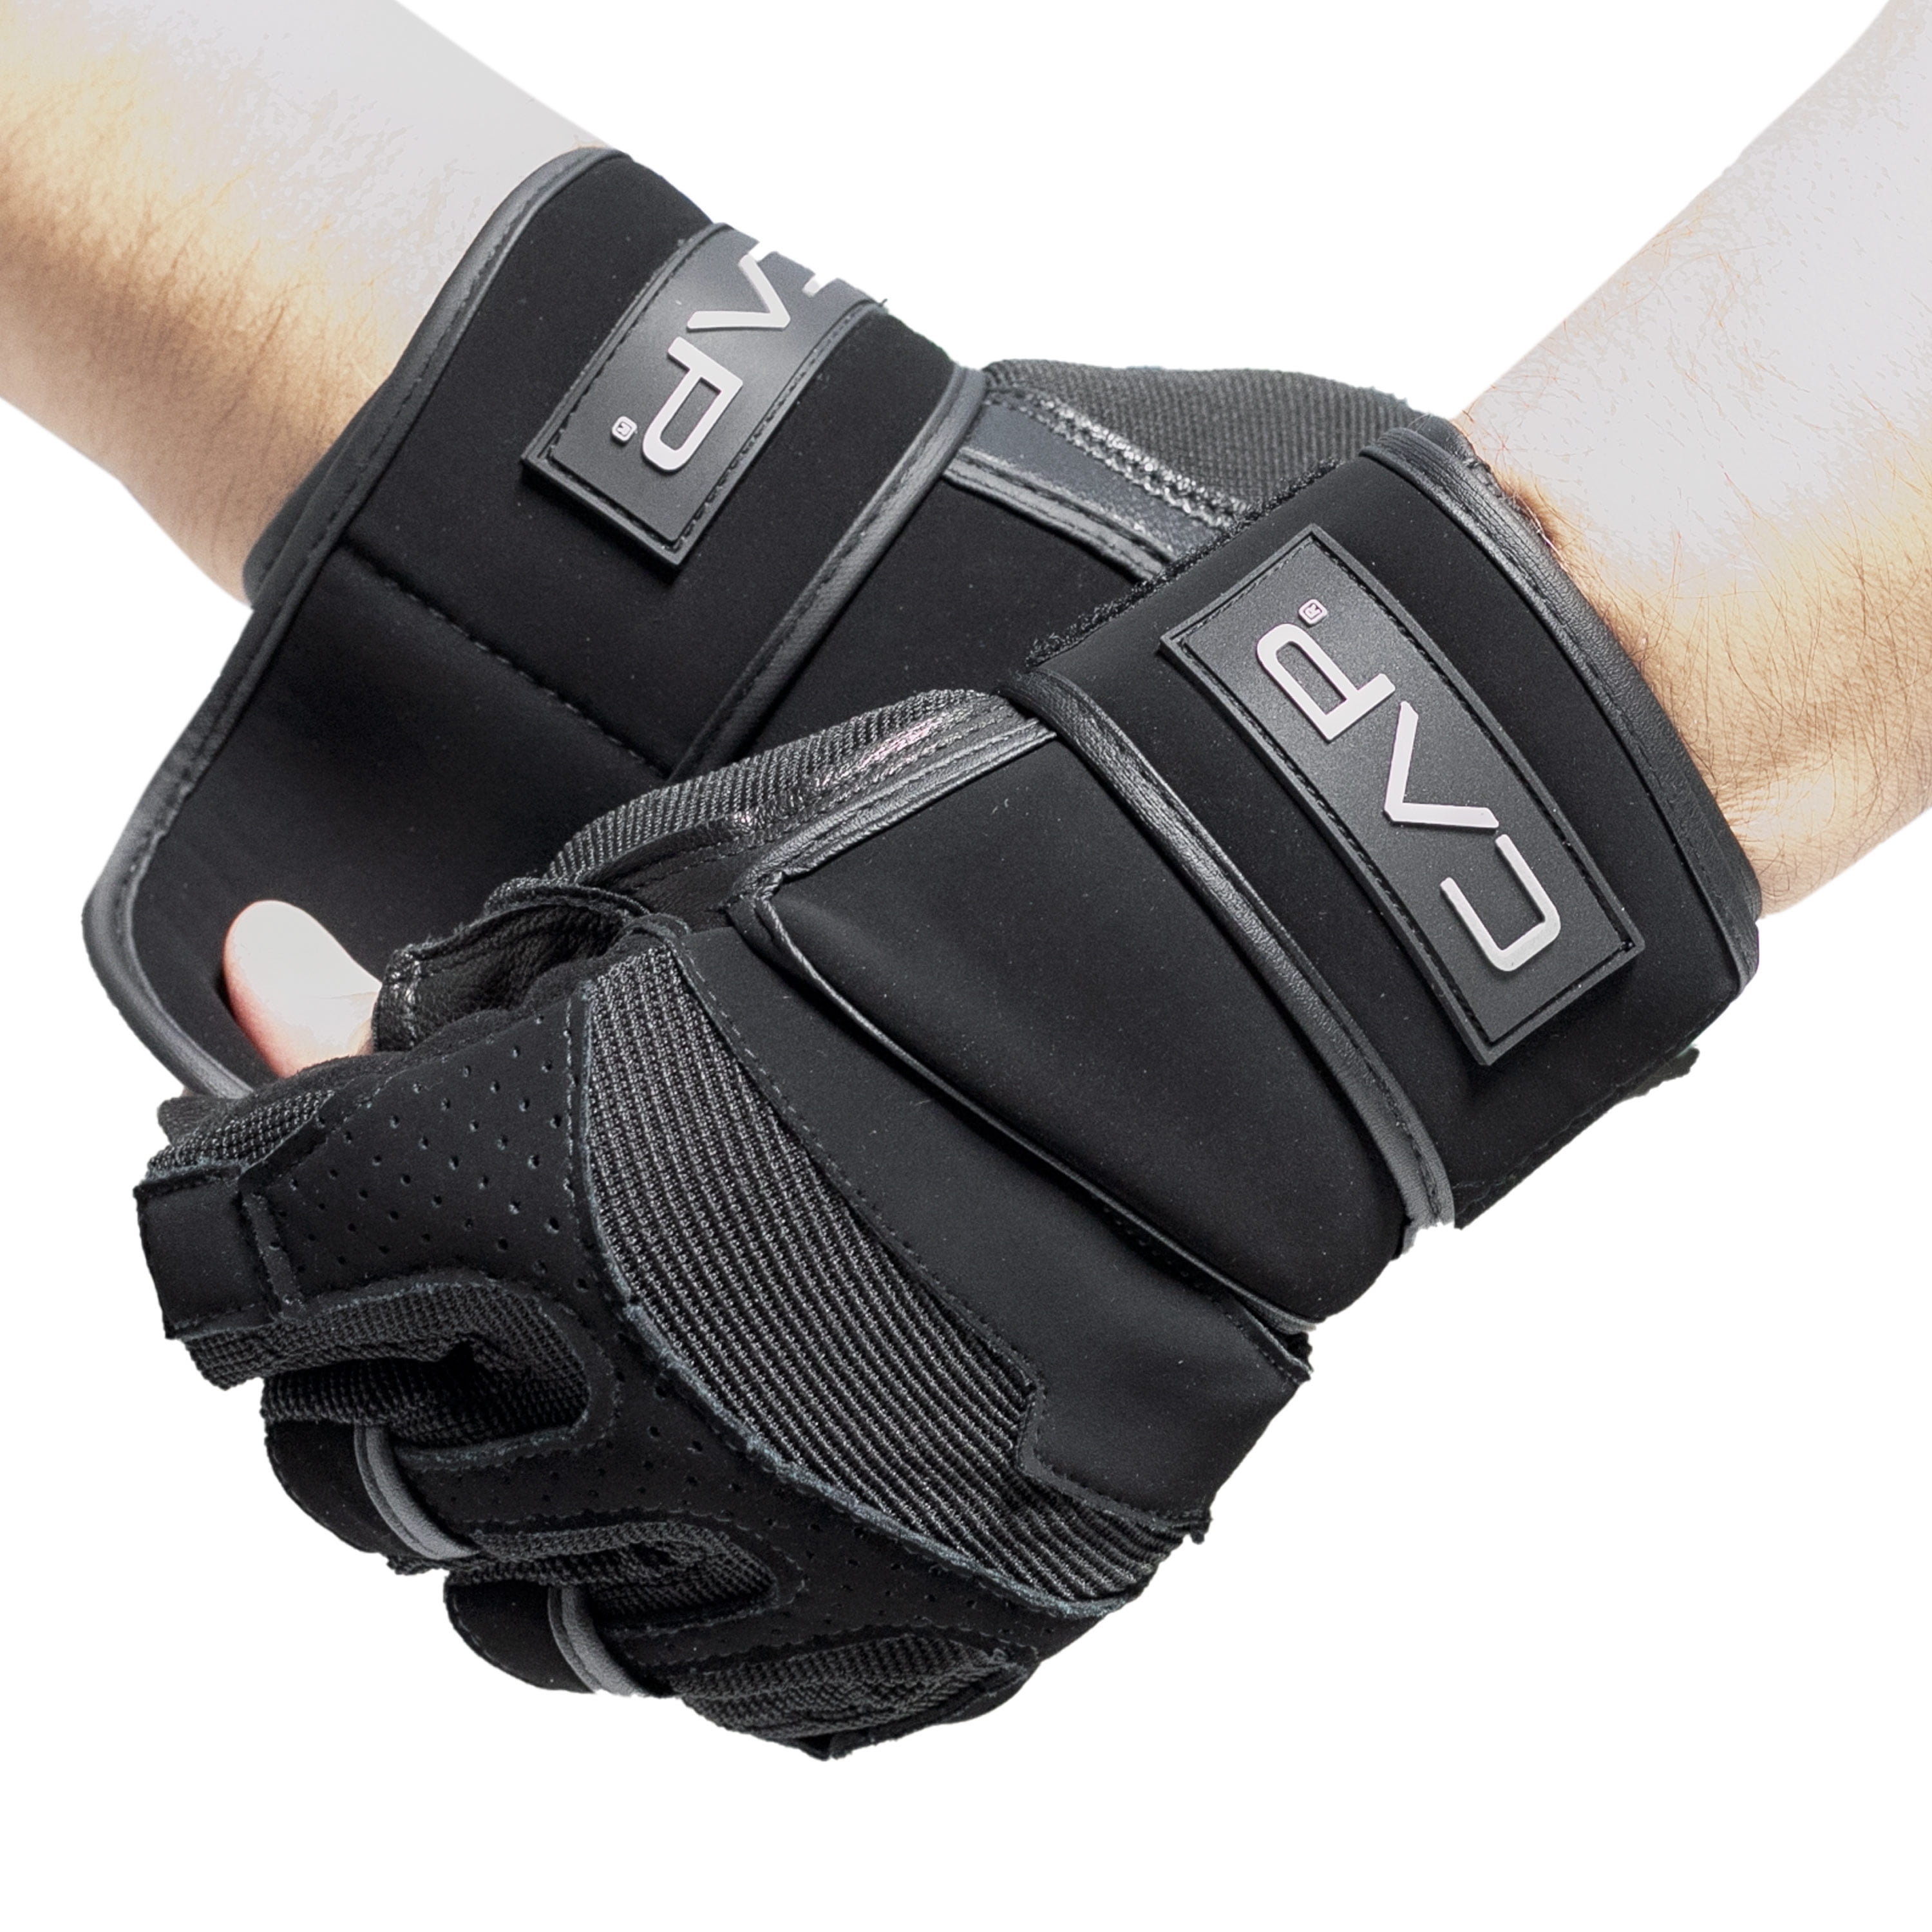 NEW Golds Gym Elite Wrist Wrap Gloves Weight Strength Training Exercise XS/S 